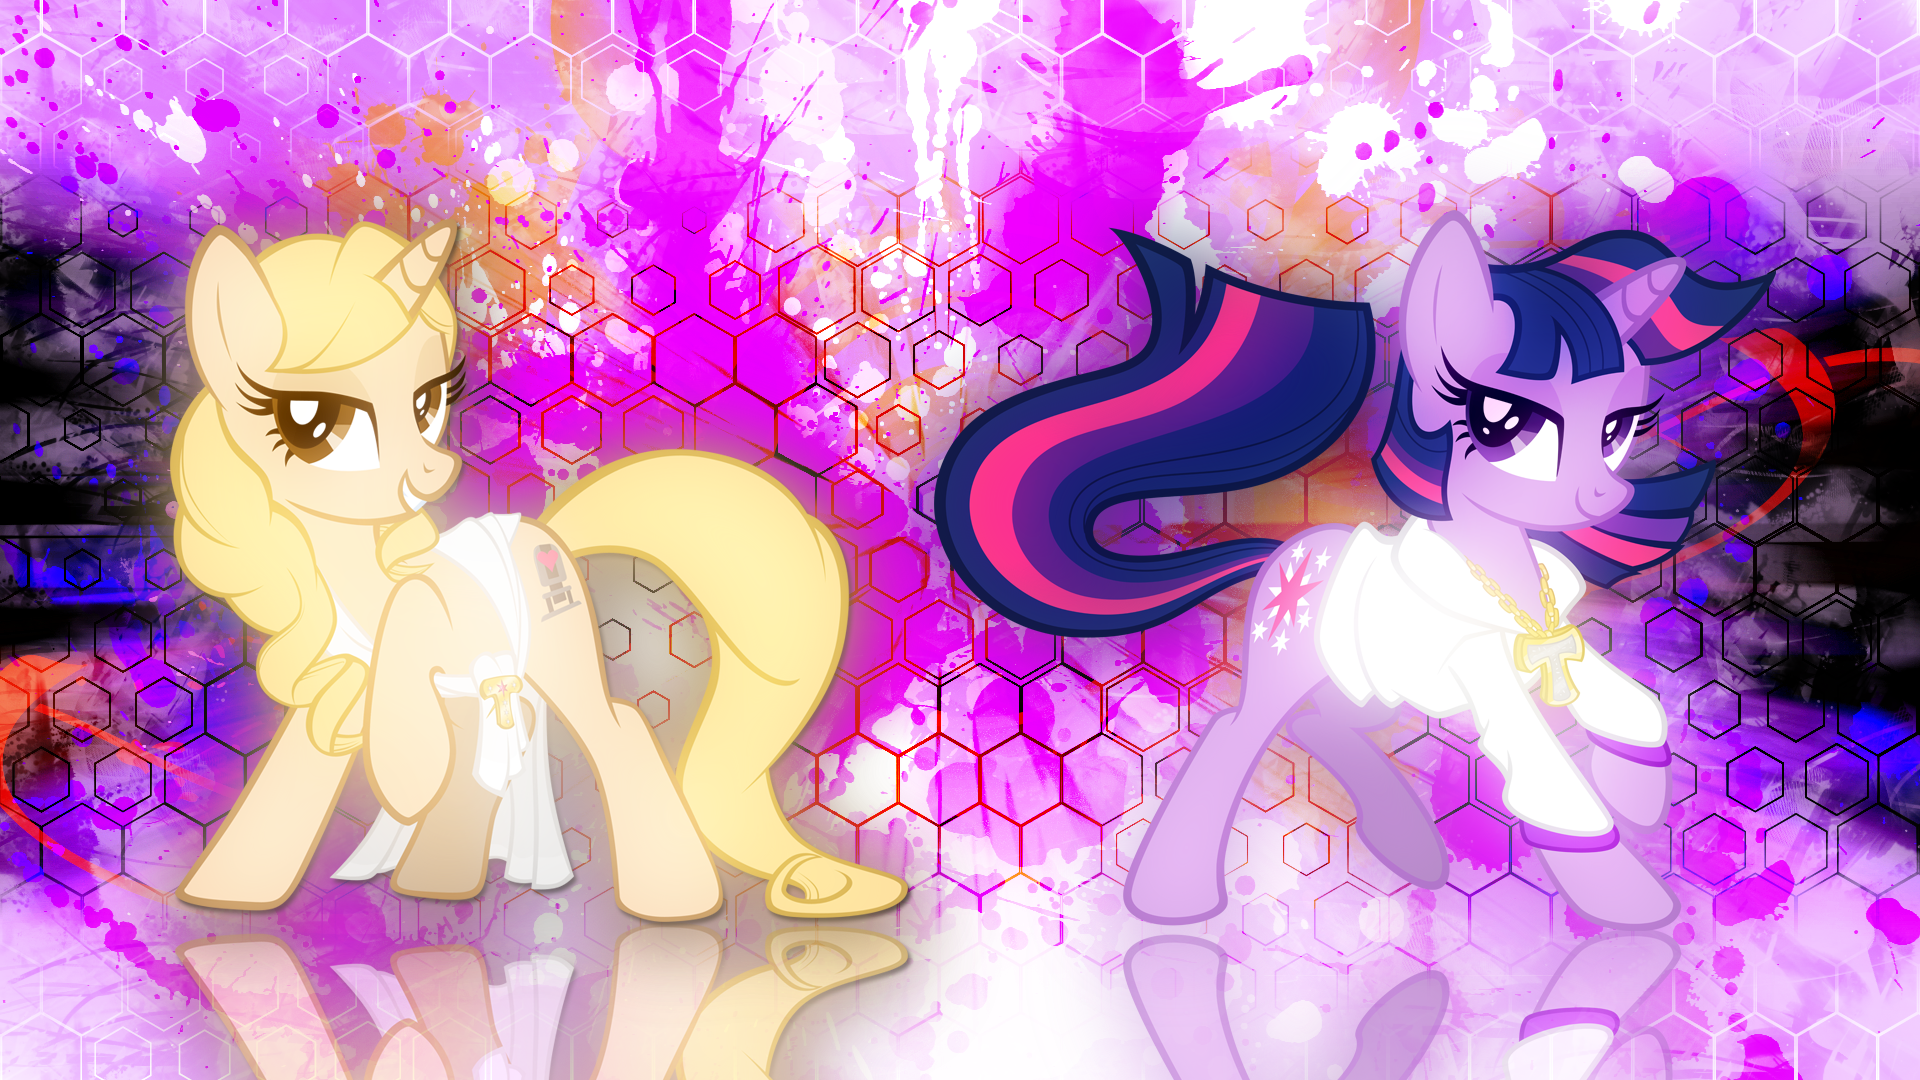 Taralicious and Twilightlicious Wallpaper by EnemyD, johnjoseco, Lysok and tygerbug